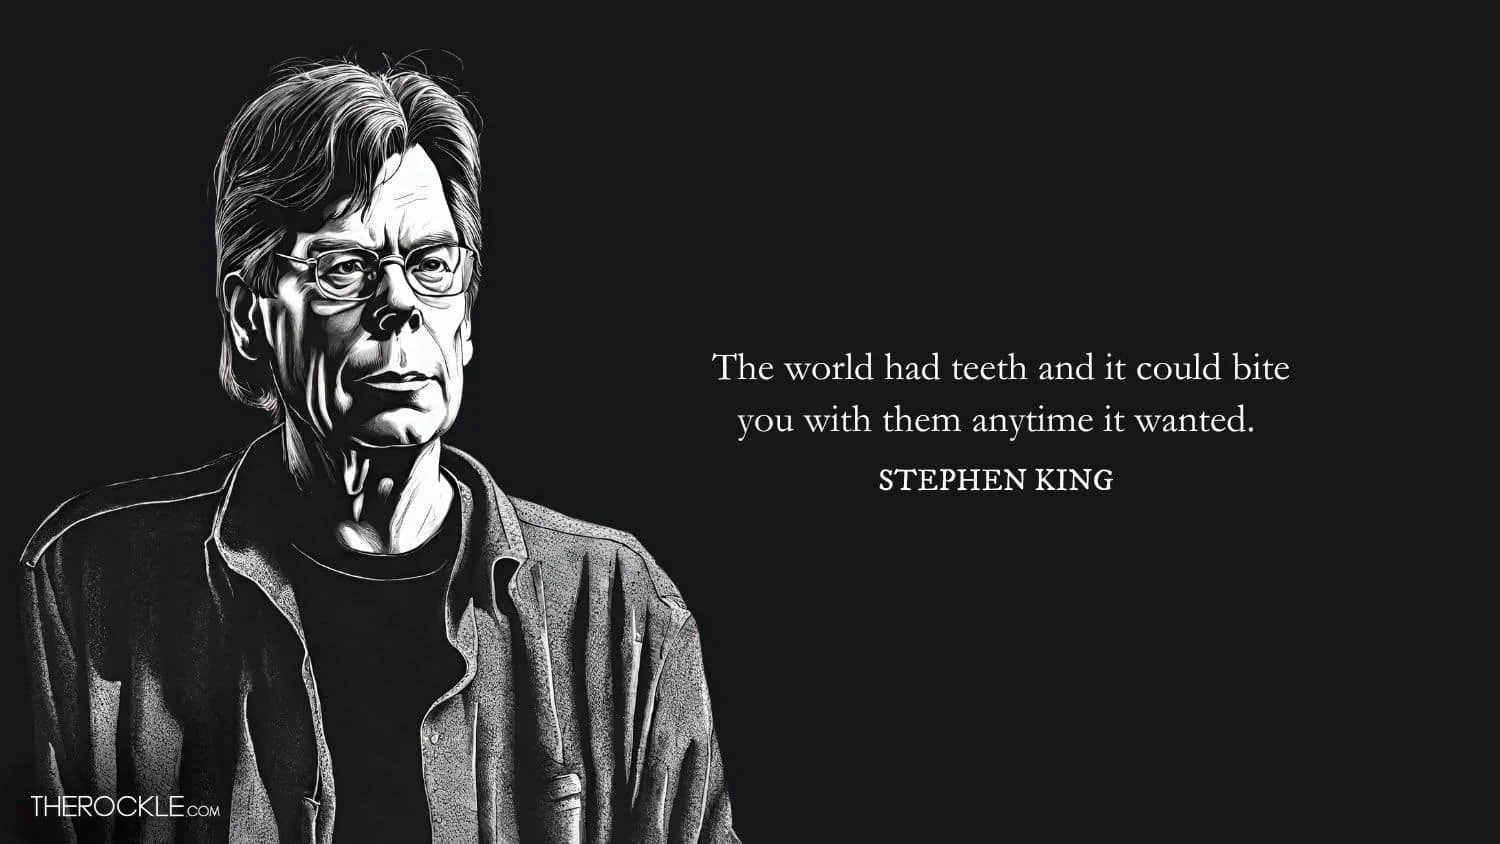 Stephen King portrait and quote